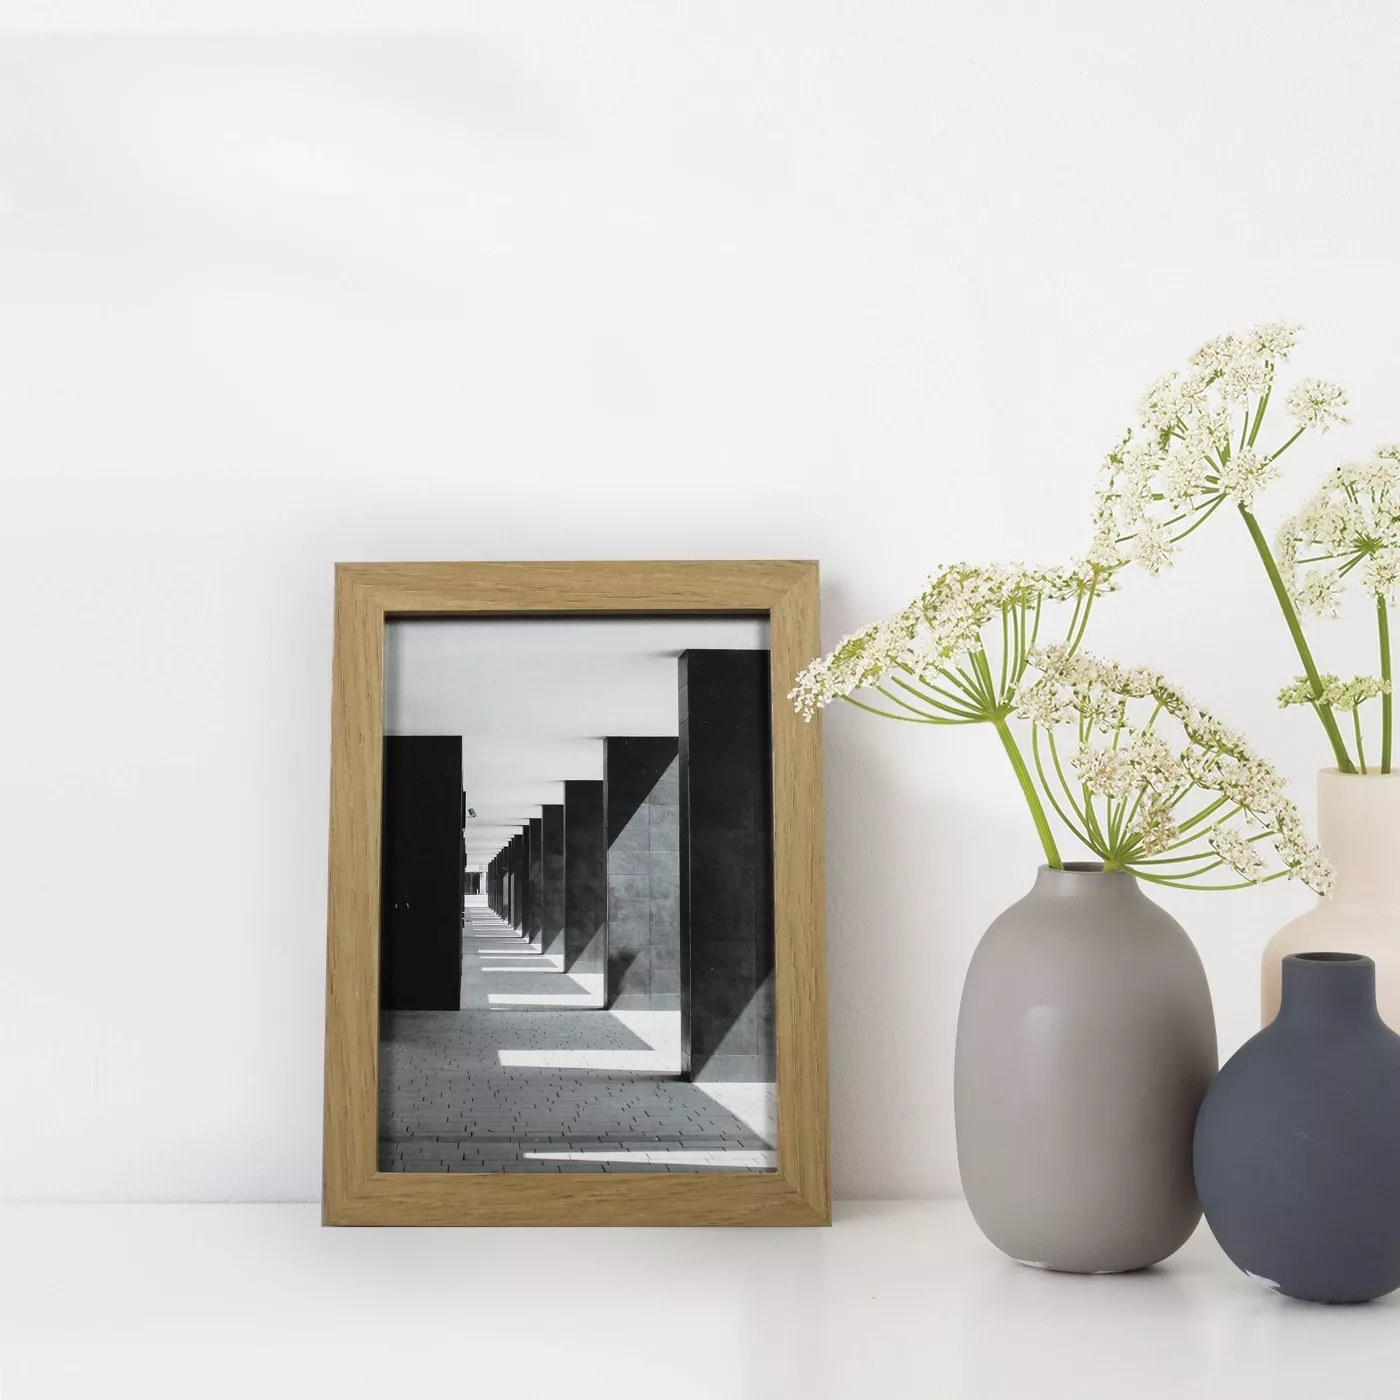 The light brown frame has a black and white stock architecture photo and is next to pastel colored pottery holding flowers